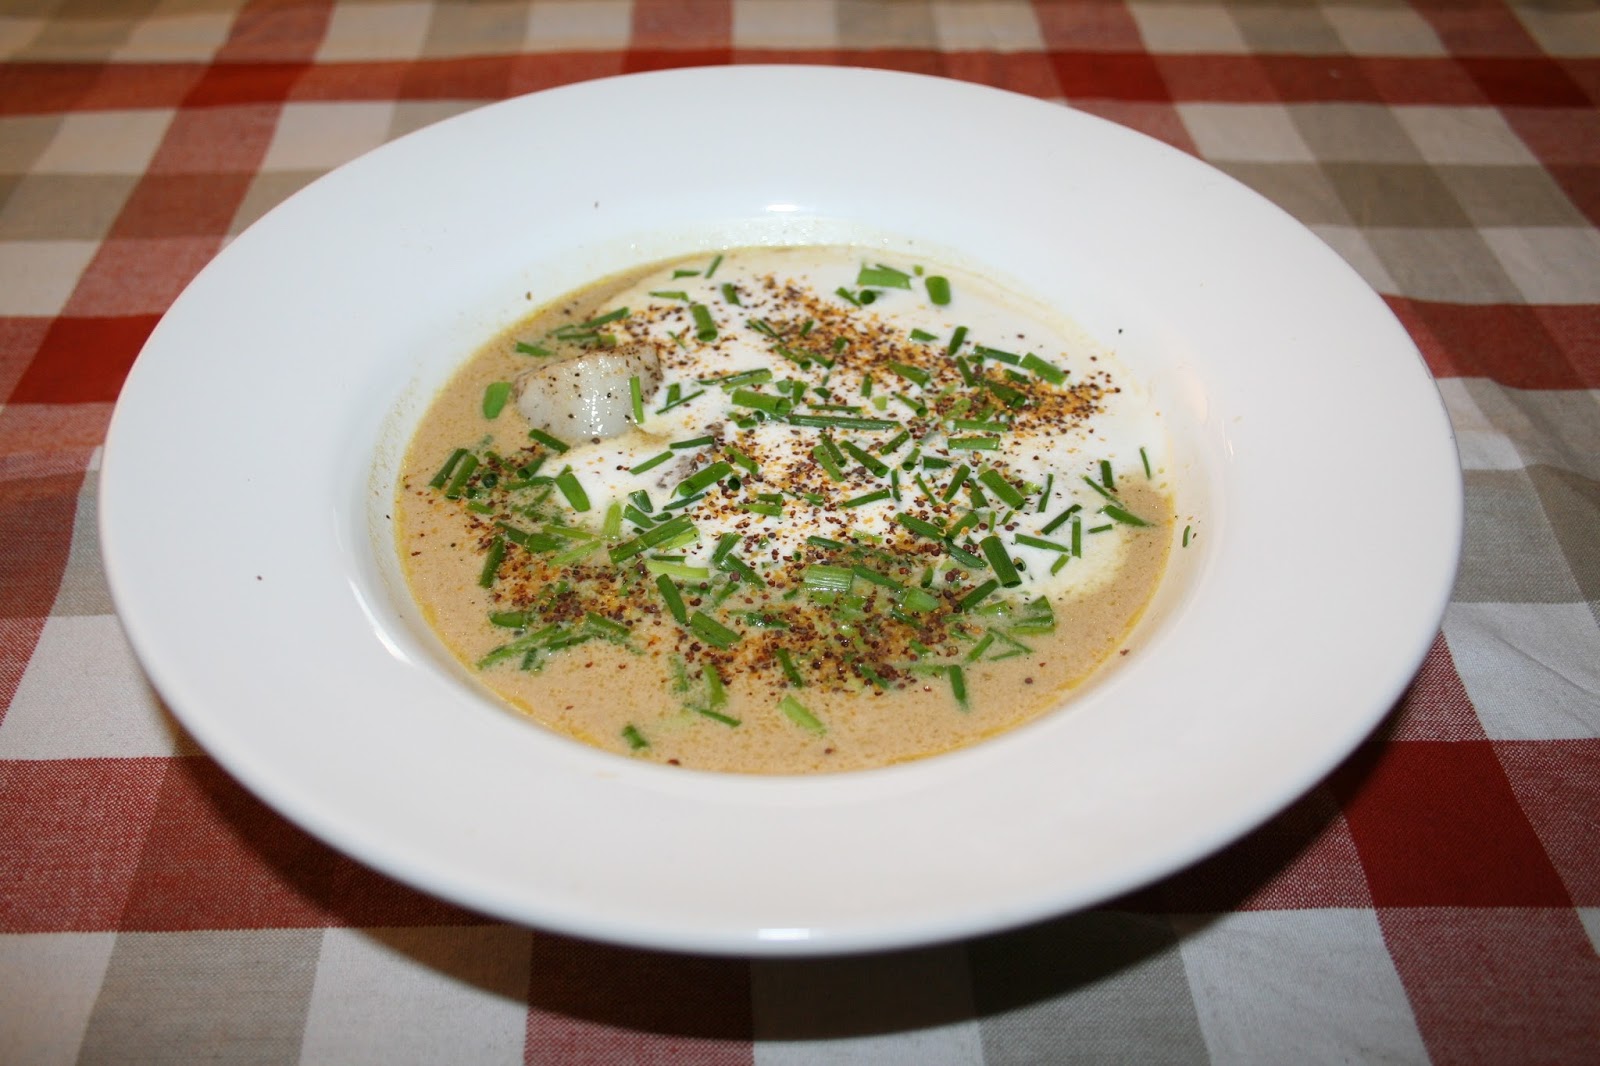 Champagner-Senf-Suppe